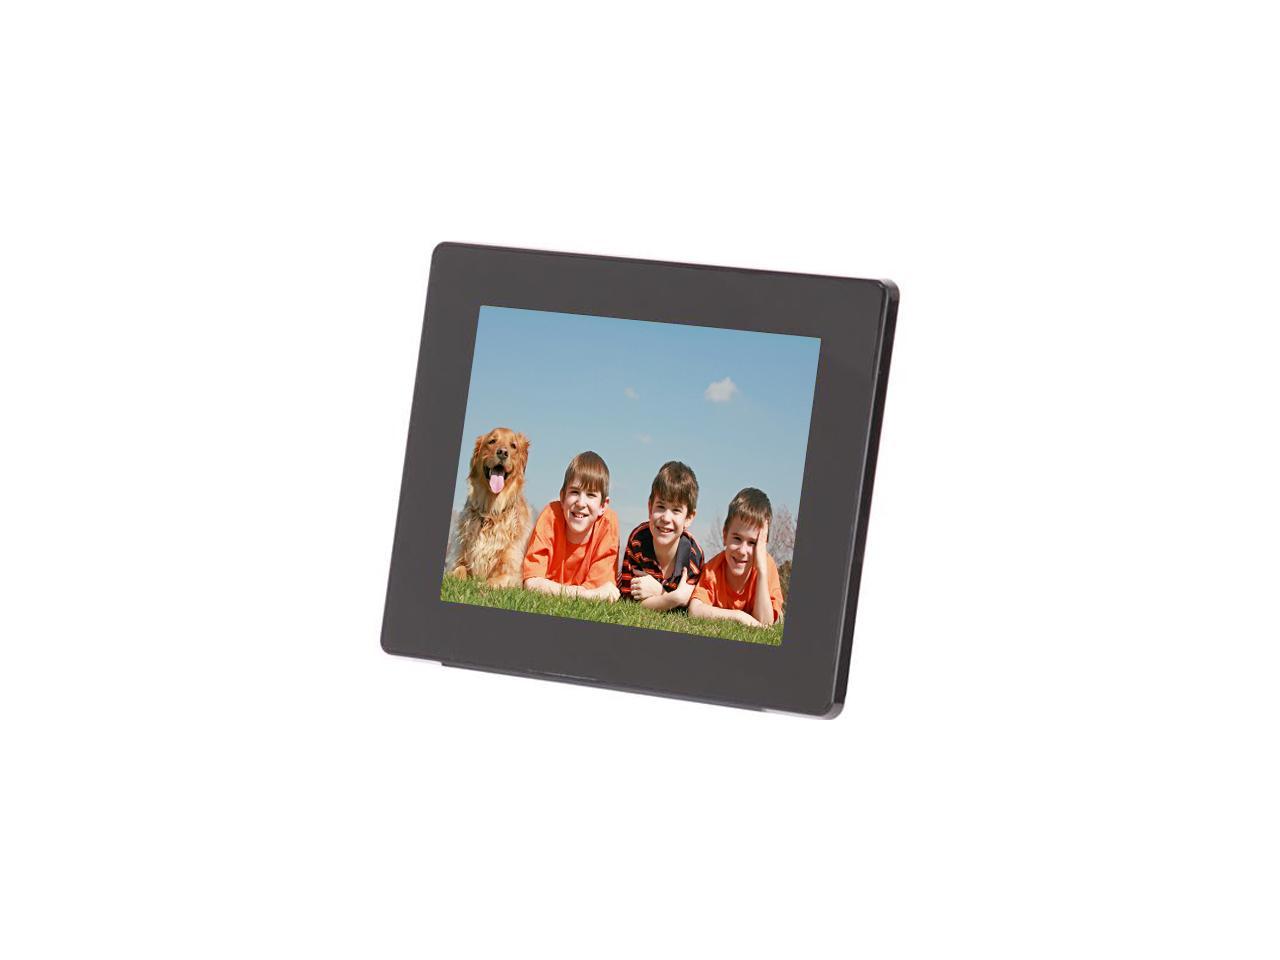 12 Hi-Res Digital Photo Frame with 4GB Built-In Memory and Remote 800 x 600 Resolution Aluratek ADMPF512F Photo/Music/Video Support Wall Mountable 